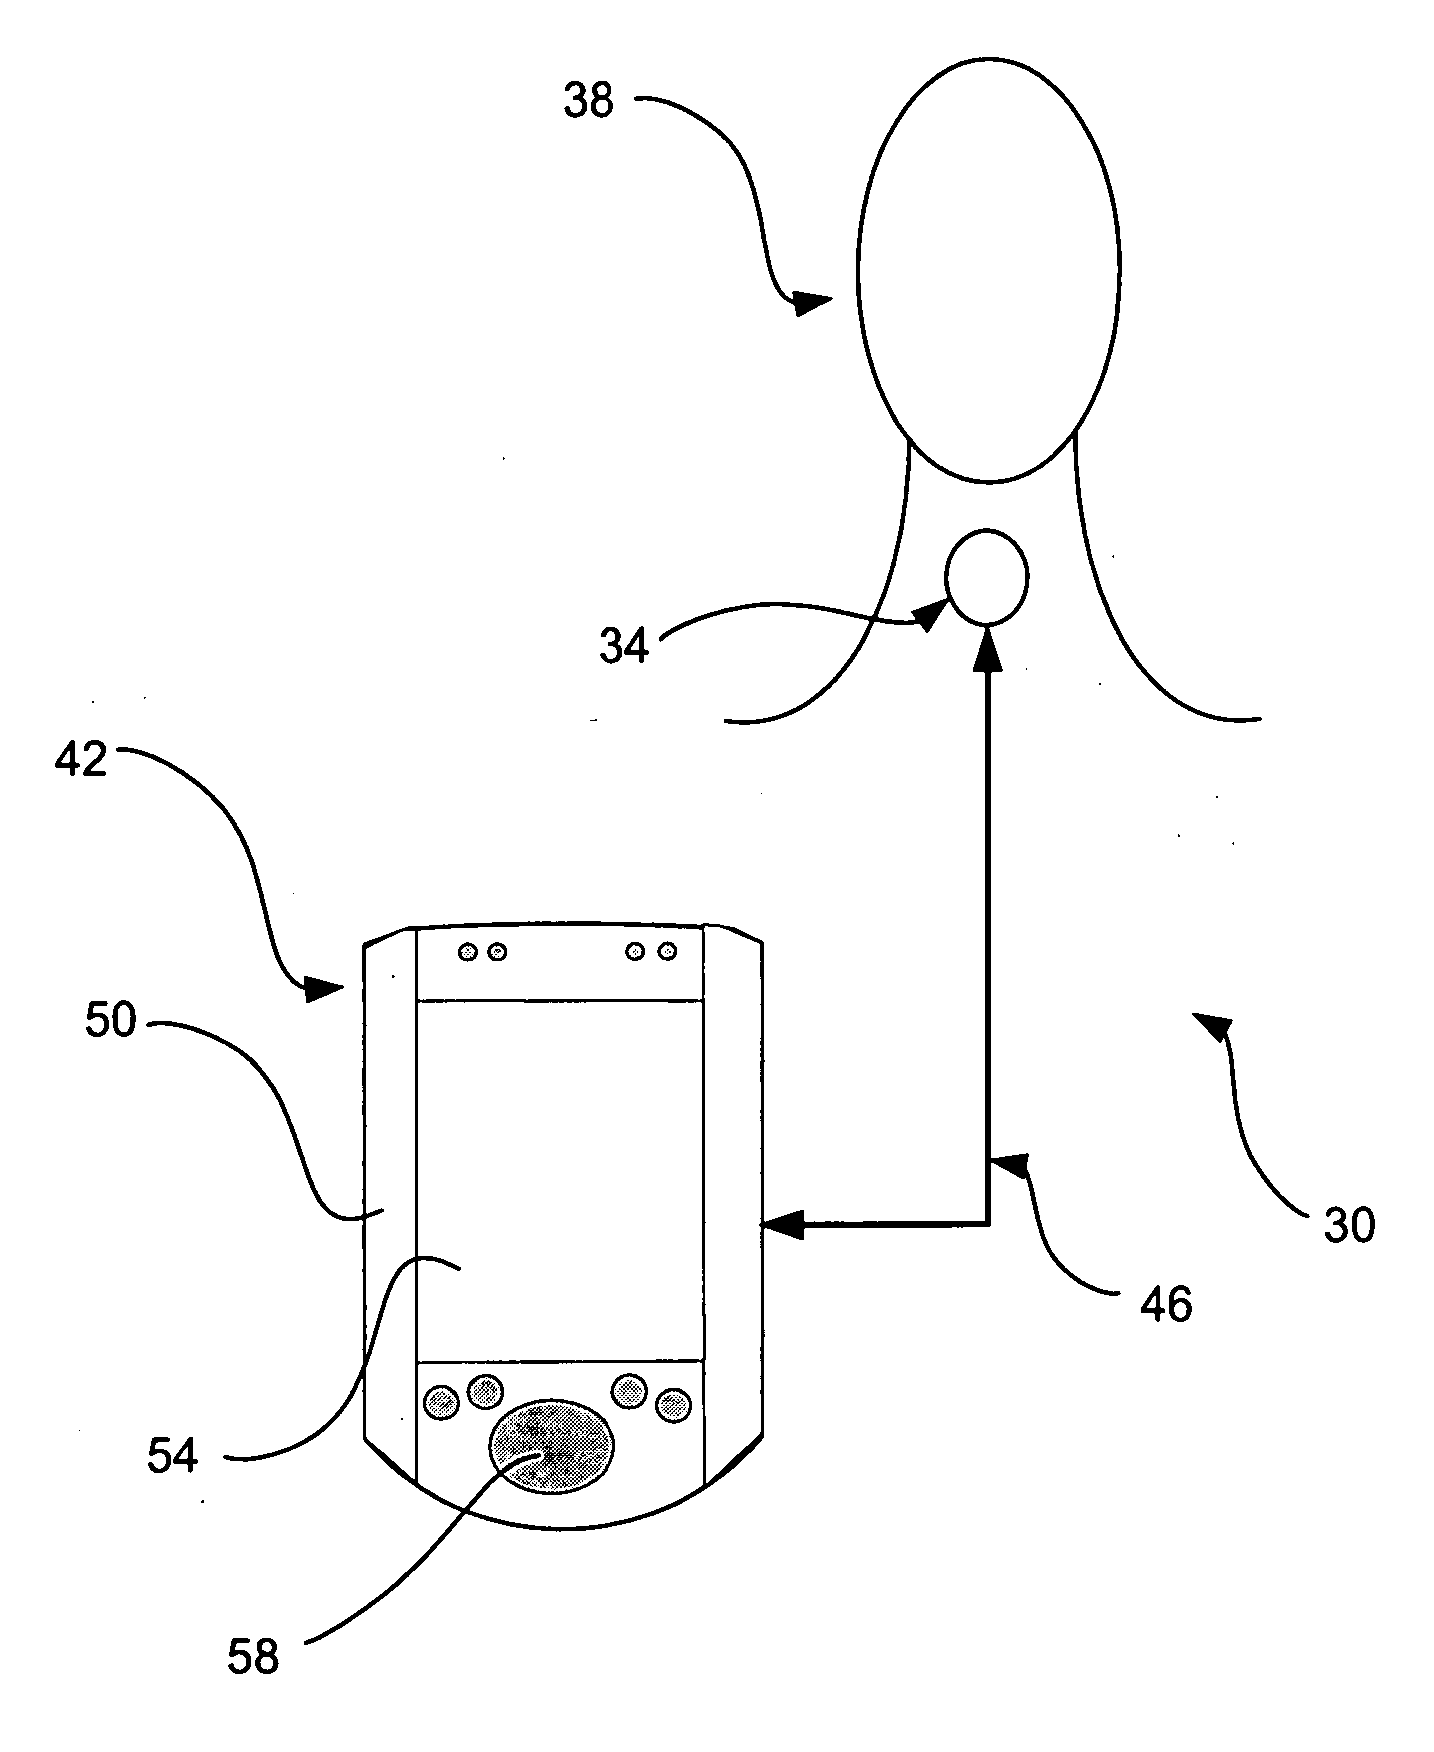 Apparatus and method for detecting swallowing activity